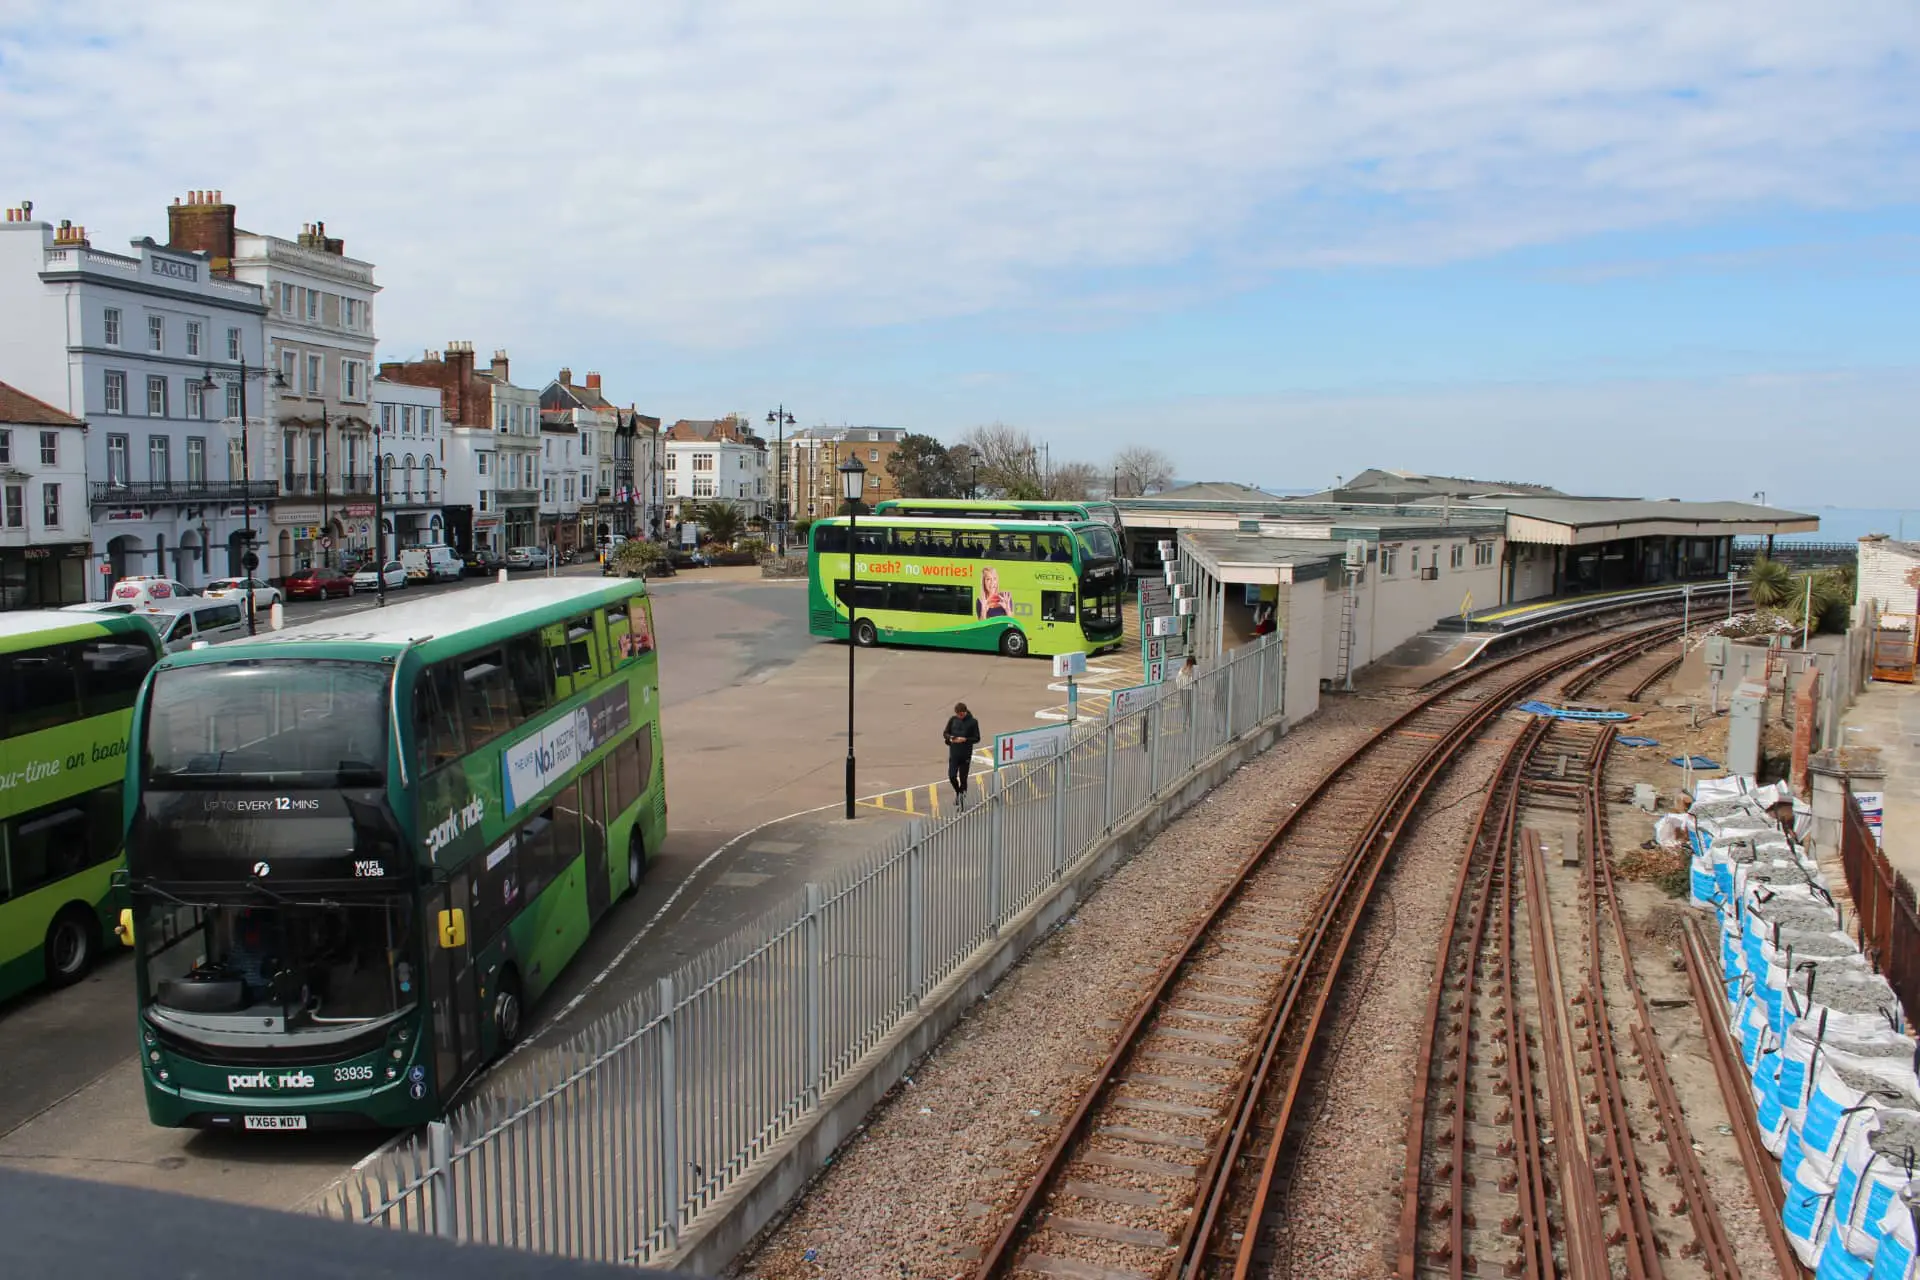 Ryde bus and train station